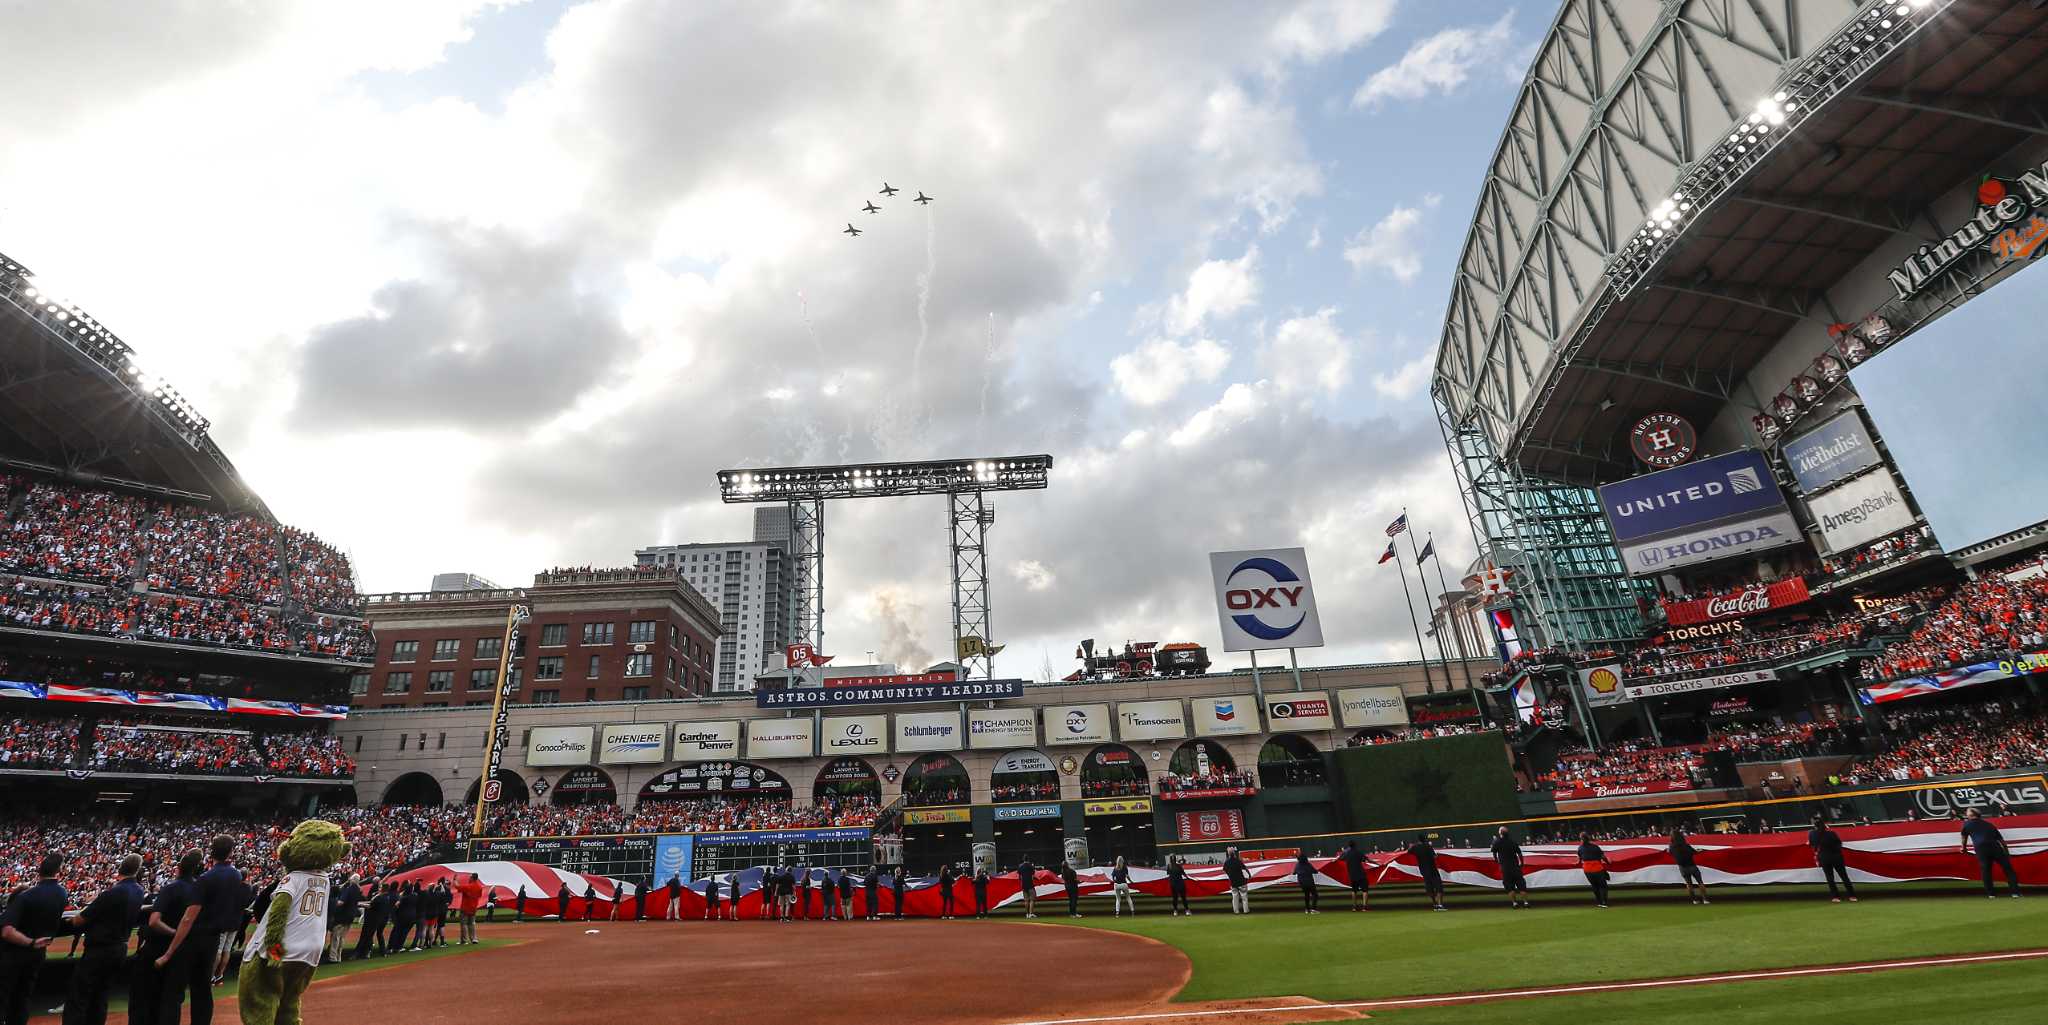 Minute Maid Park to host Super Bowl's 'Opening Night